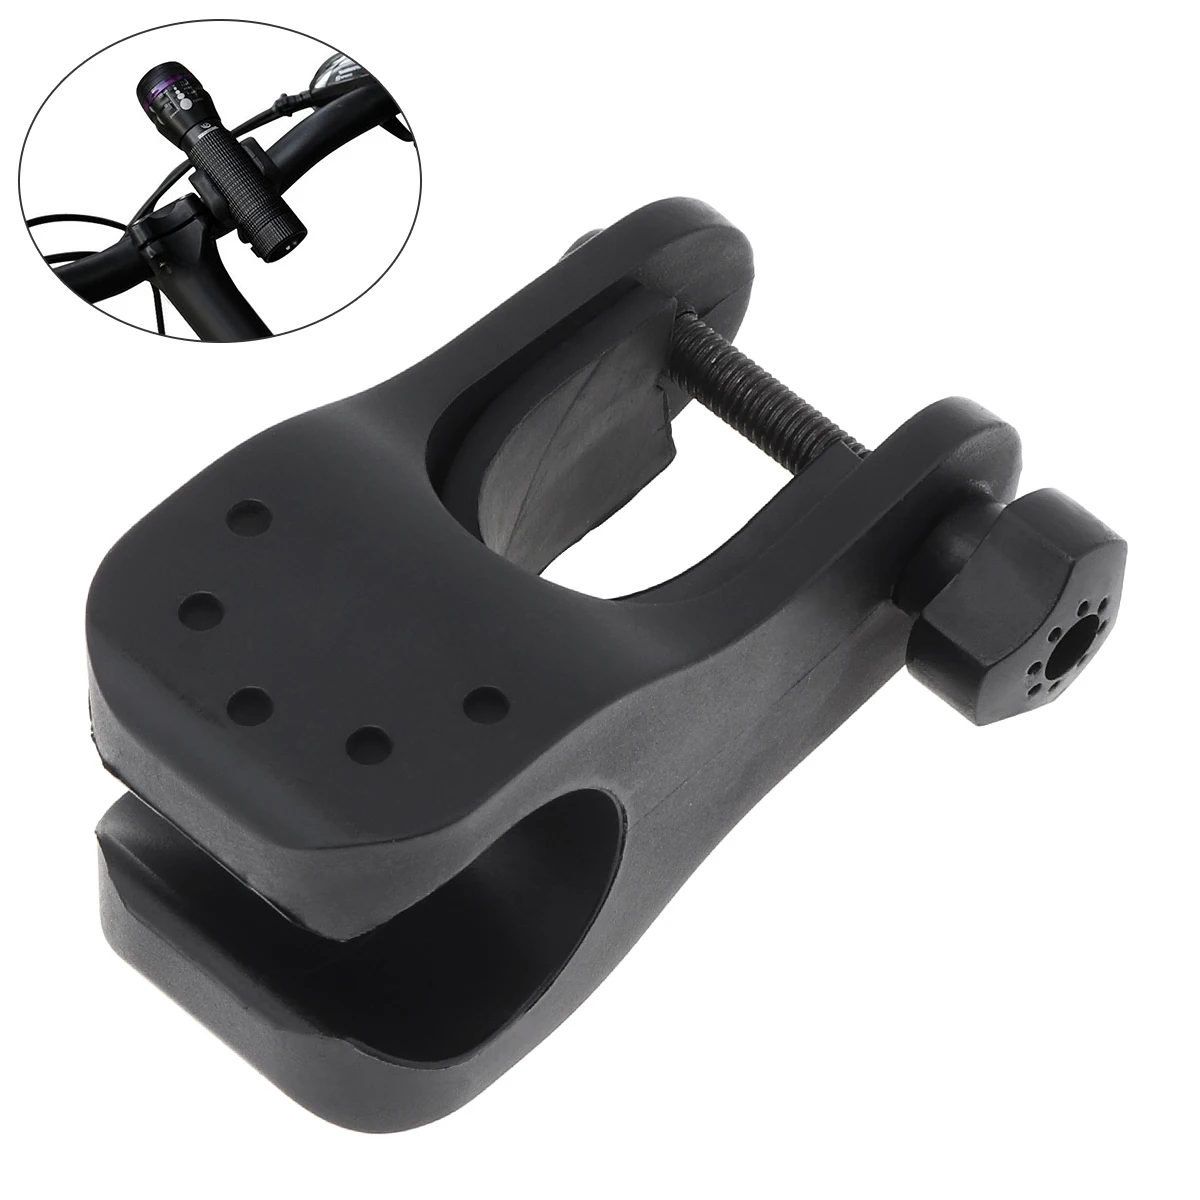 Shatterproof Bicycle Cycle Light Stand Bike Front Mount LED Headlight Holder Clip Rubber for 22-35mm Diameter Flashlight andoer 25 4 31 8mm out front bike mount